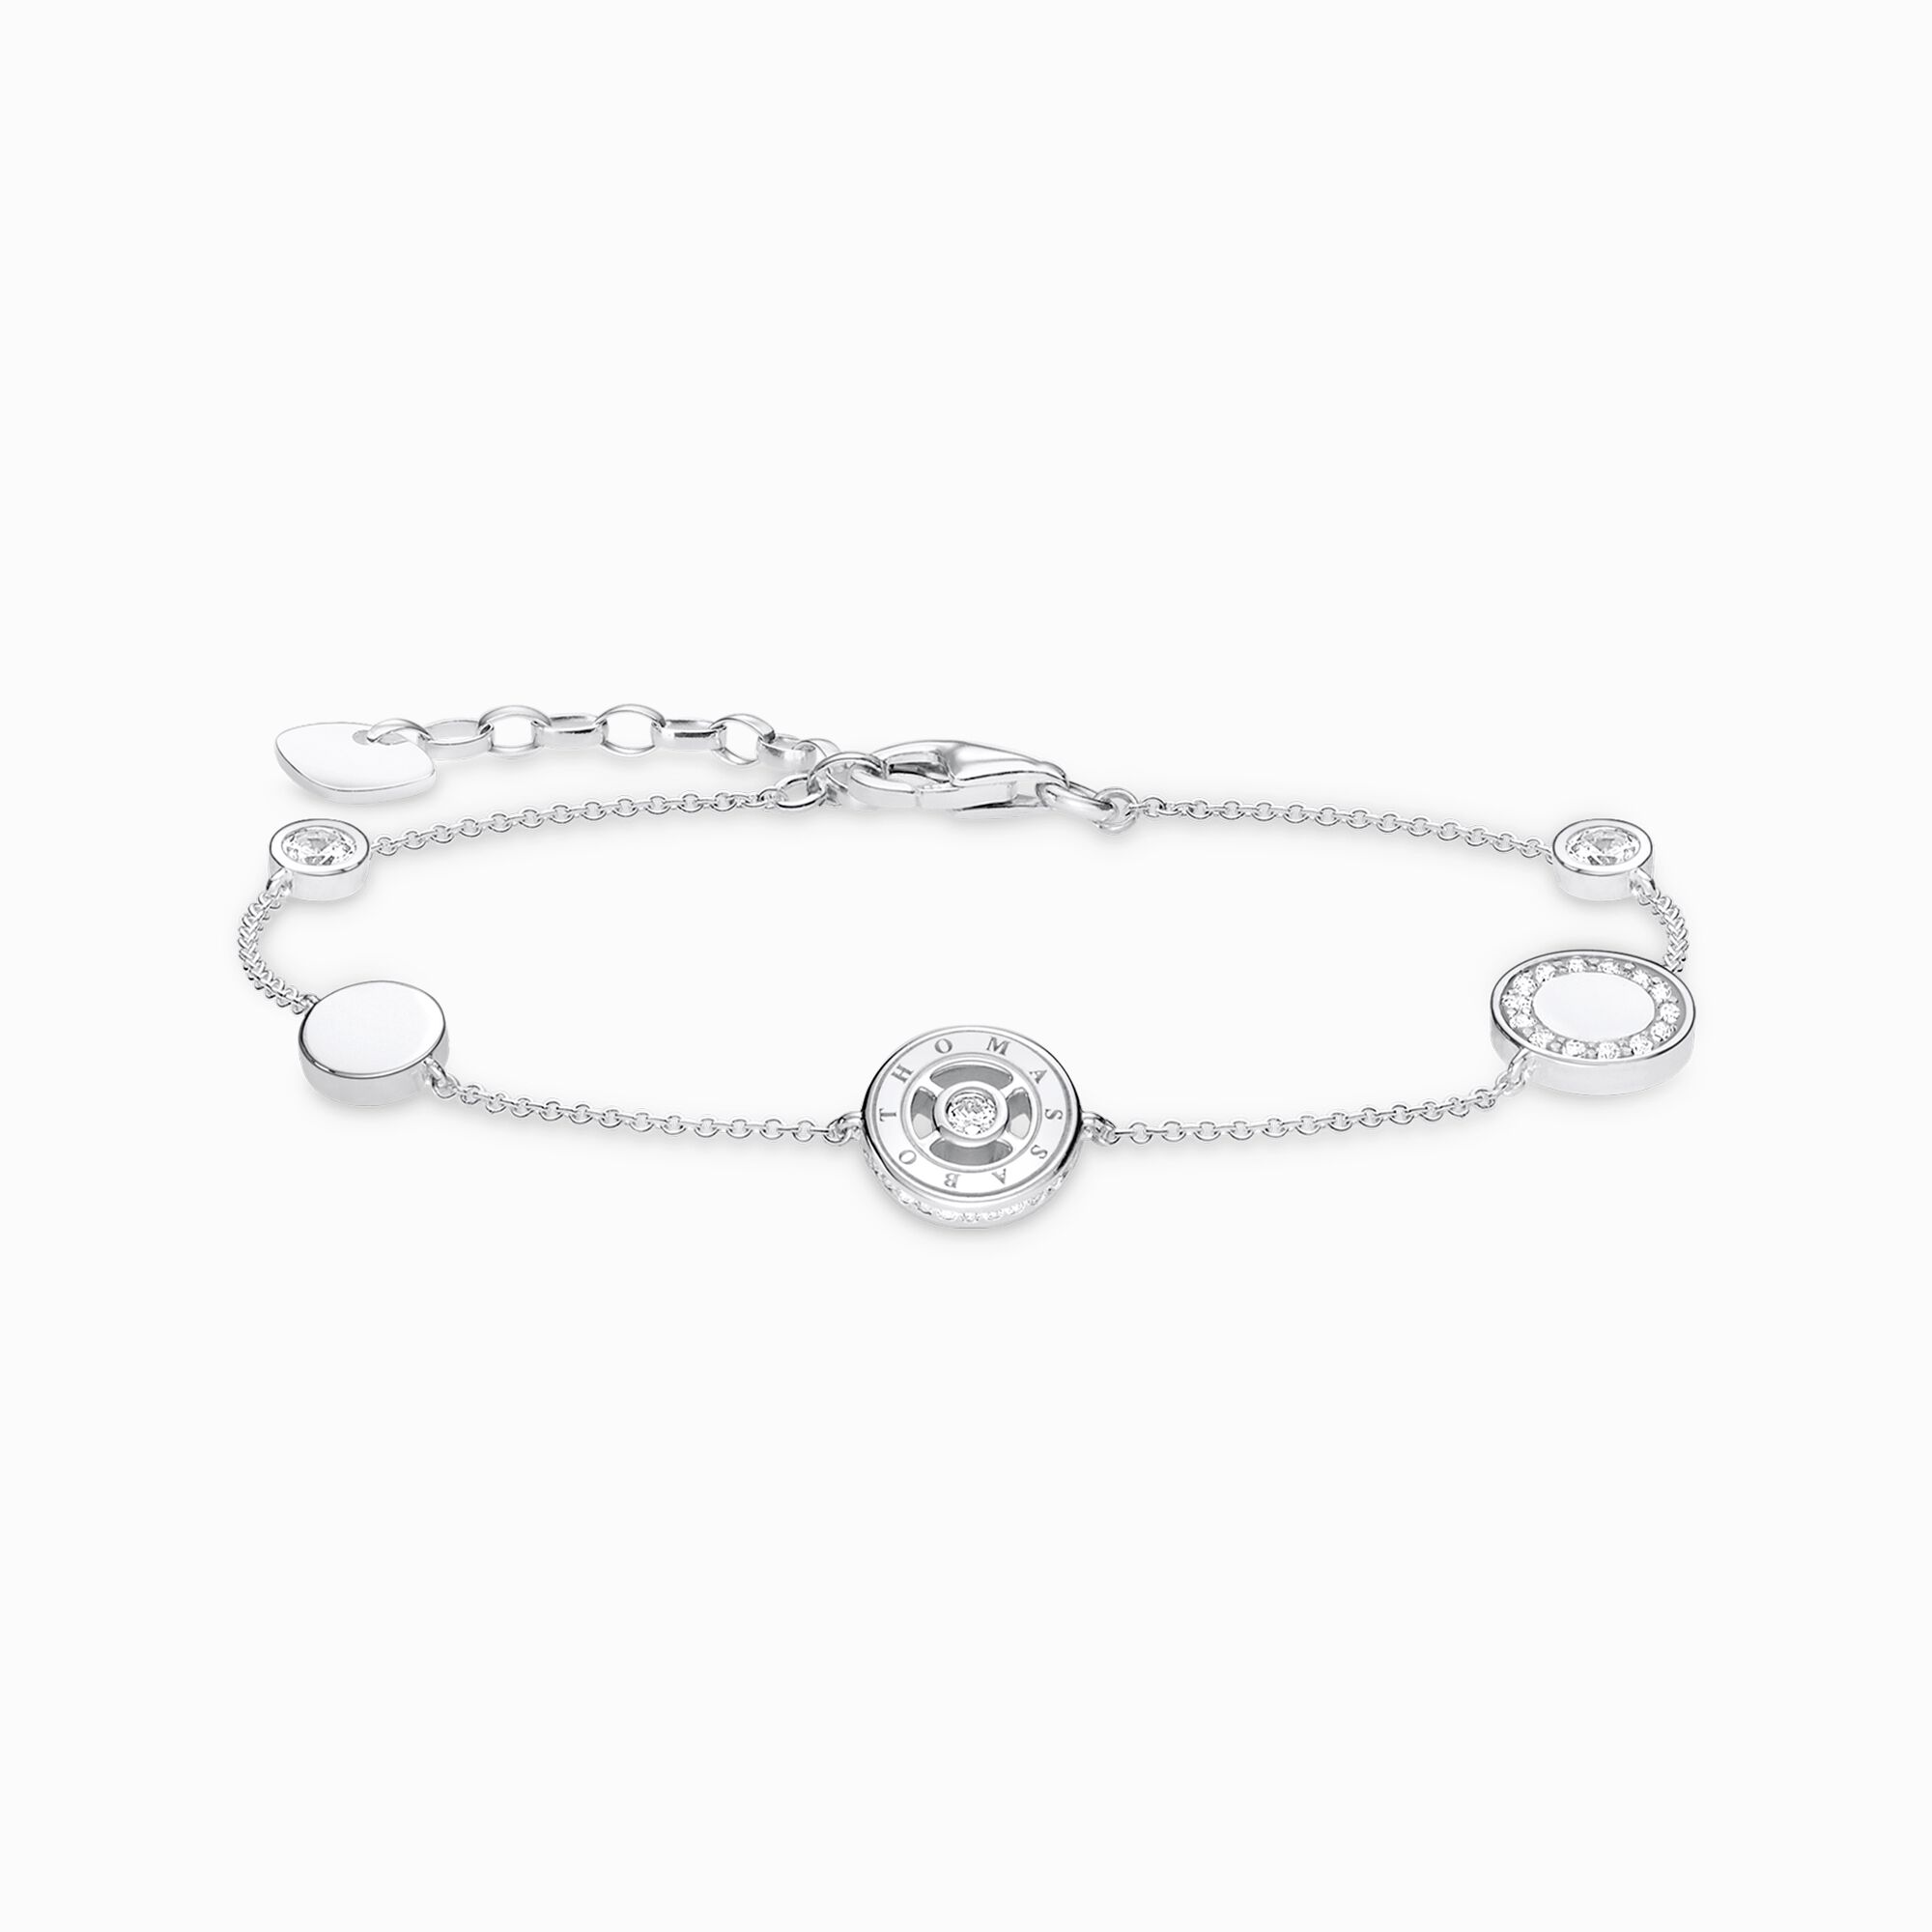 Bracelet circles with white stones silver from the  collection in the THOMAS SABO online store